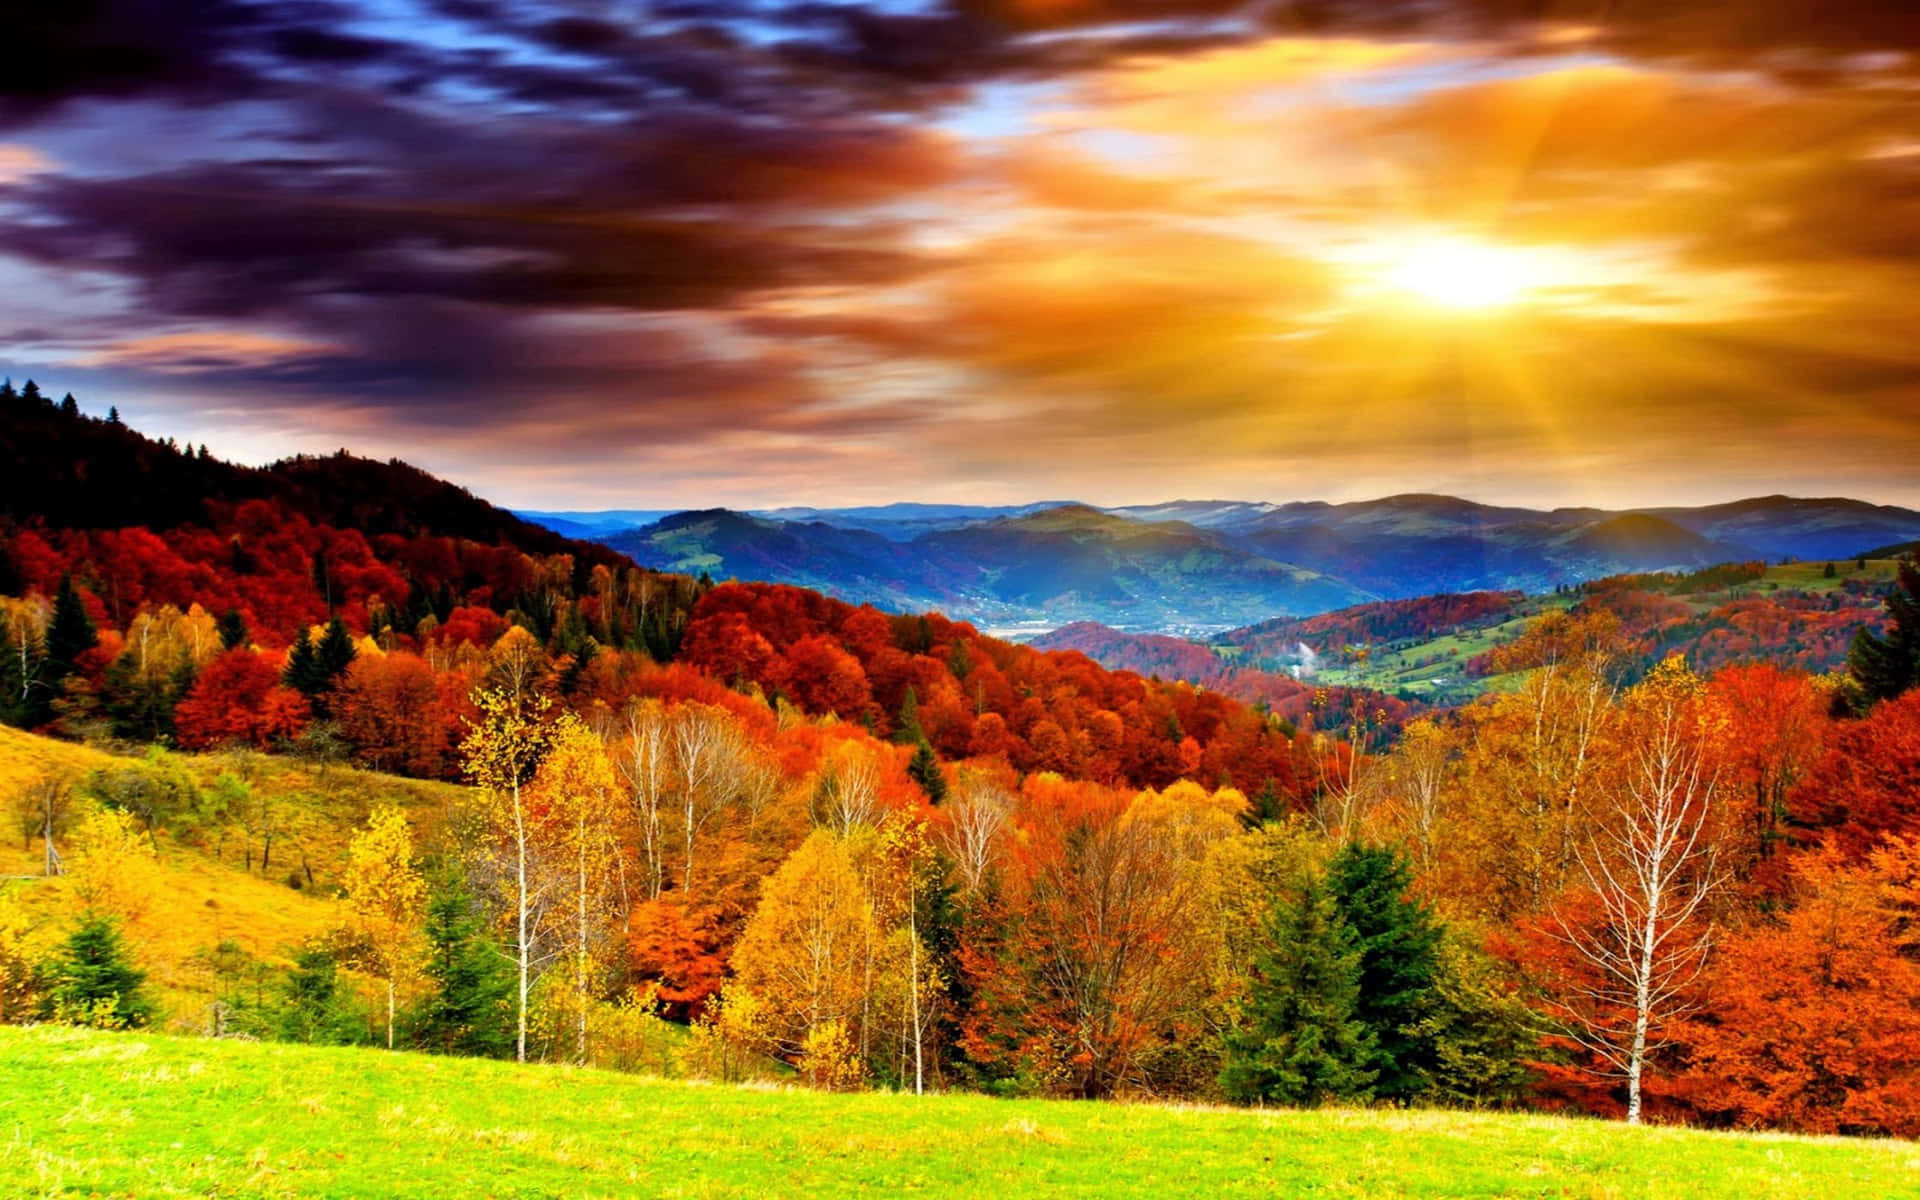 autumn landscape with colorful trees and mountains